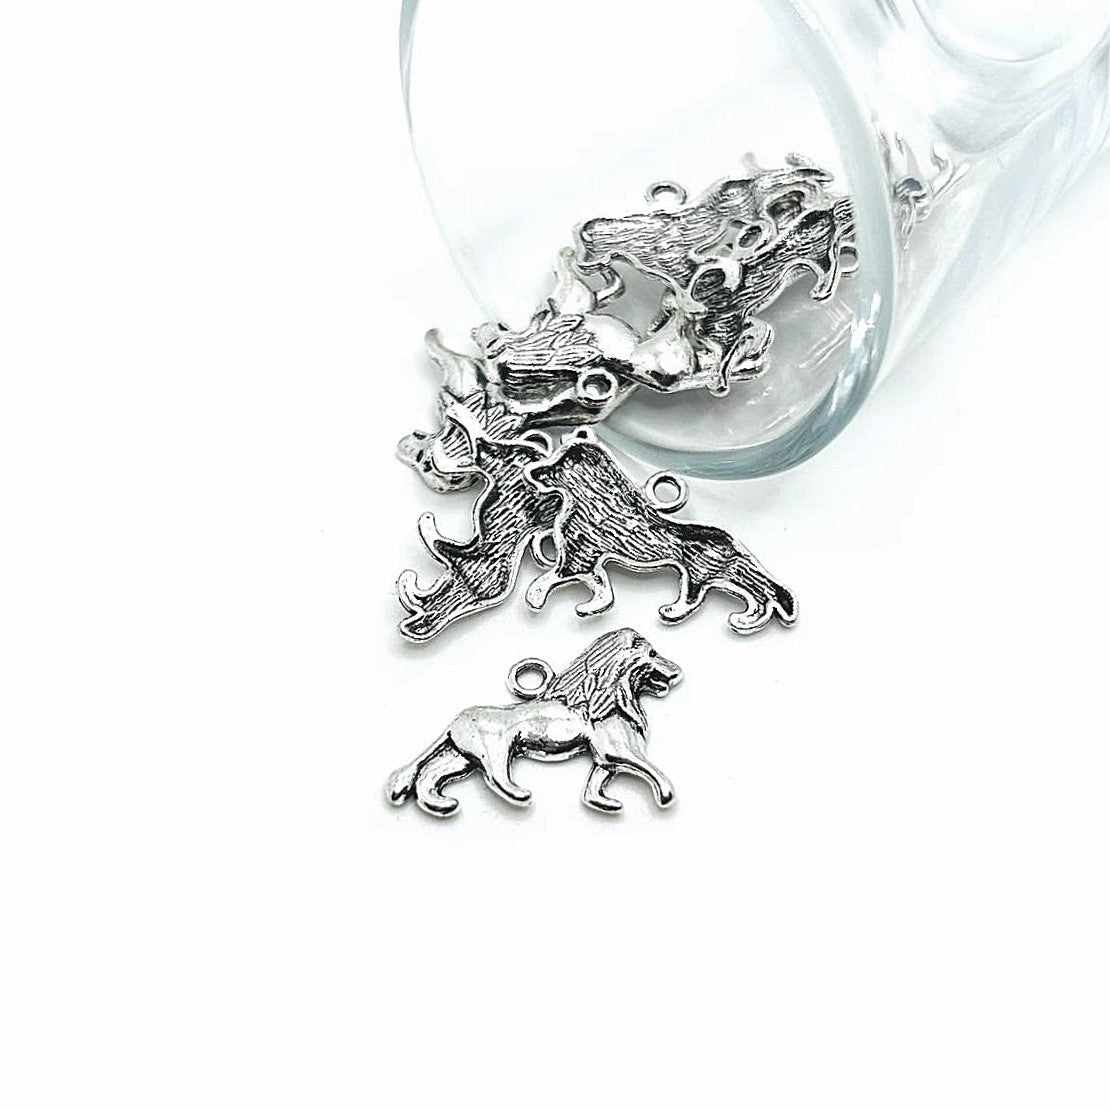 4, 20 or 50 Pieces: Silver Lion Charms